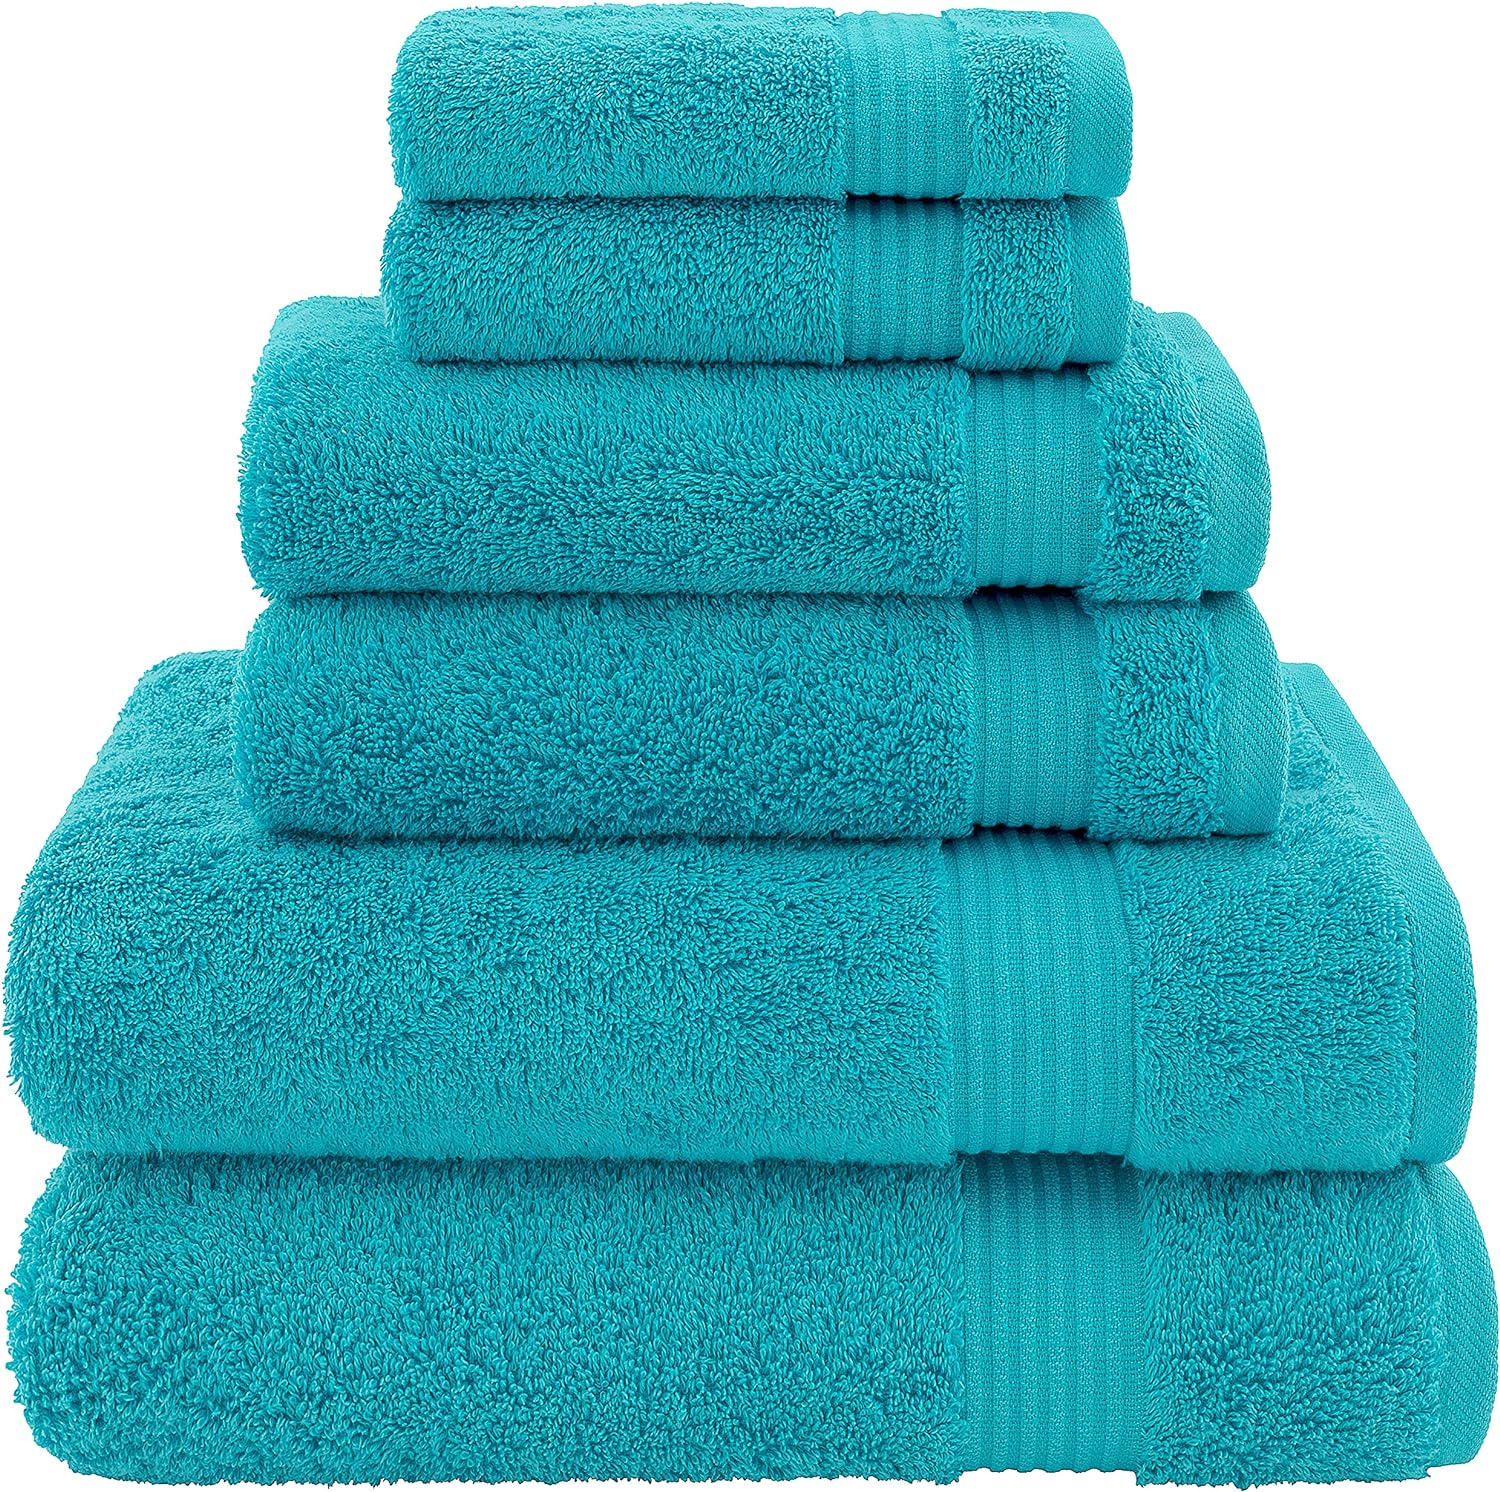 Office Bathroom Home 16x28 Inch, Pack of 6 Soft Large White Cotton Hand Towel